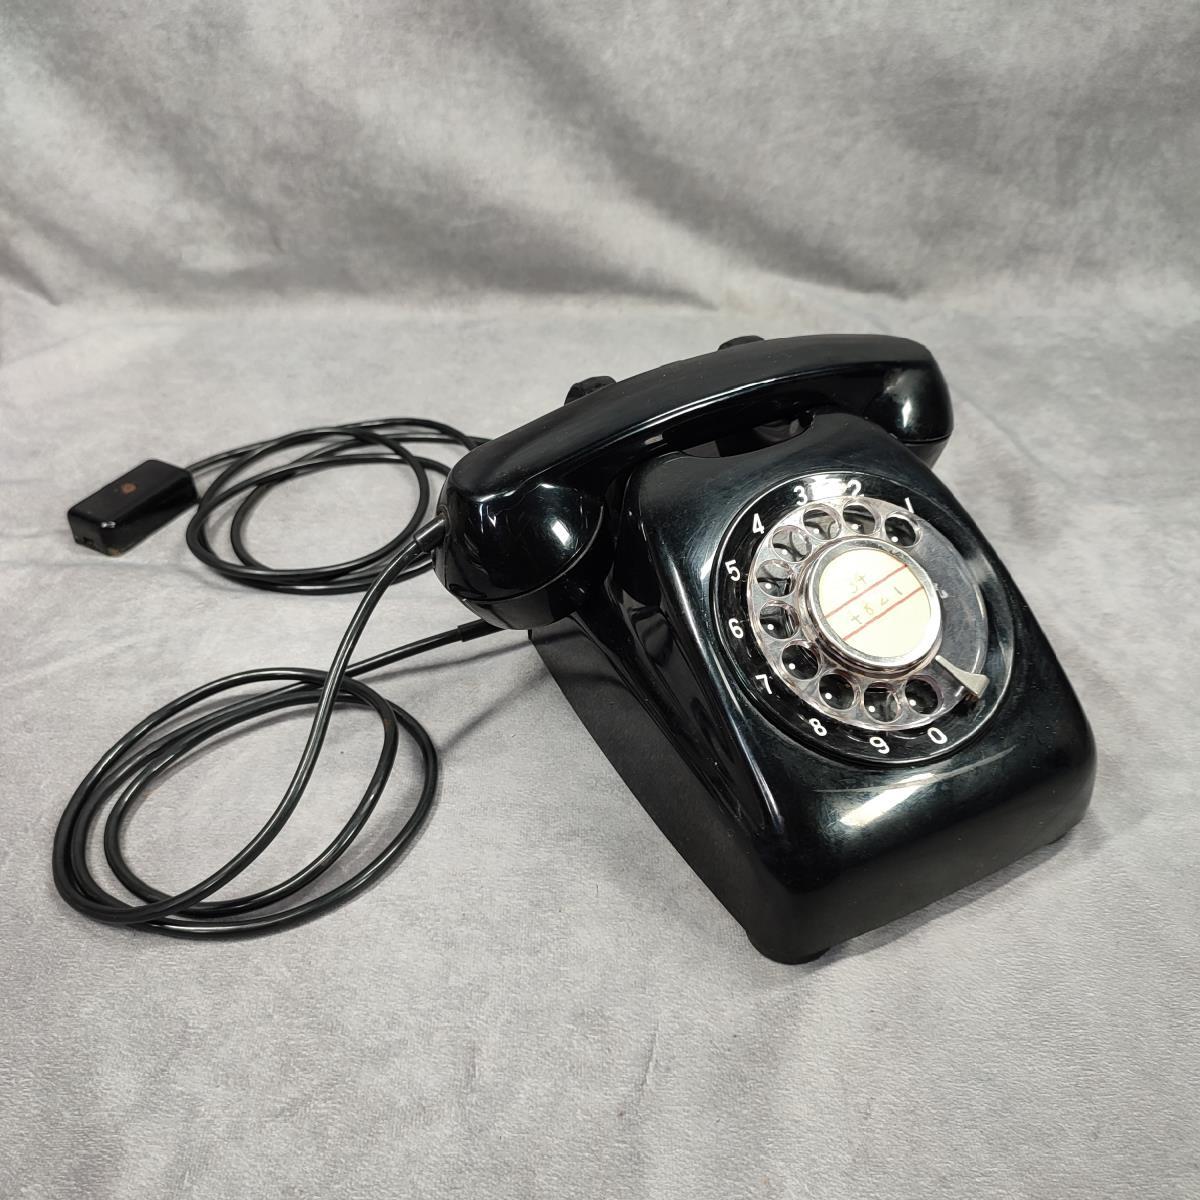  circuit map attaching [ Showa Retro ] black telephone 600-A2 telephone machine dial type Vintage consumer electronics interior objet d'art collection no start rujik secondhand goods 